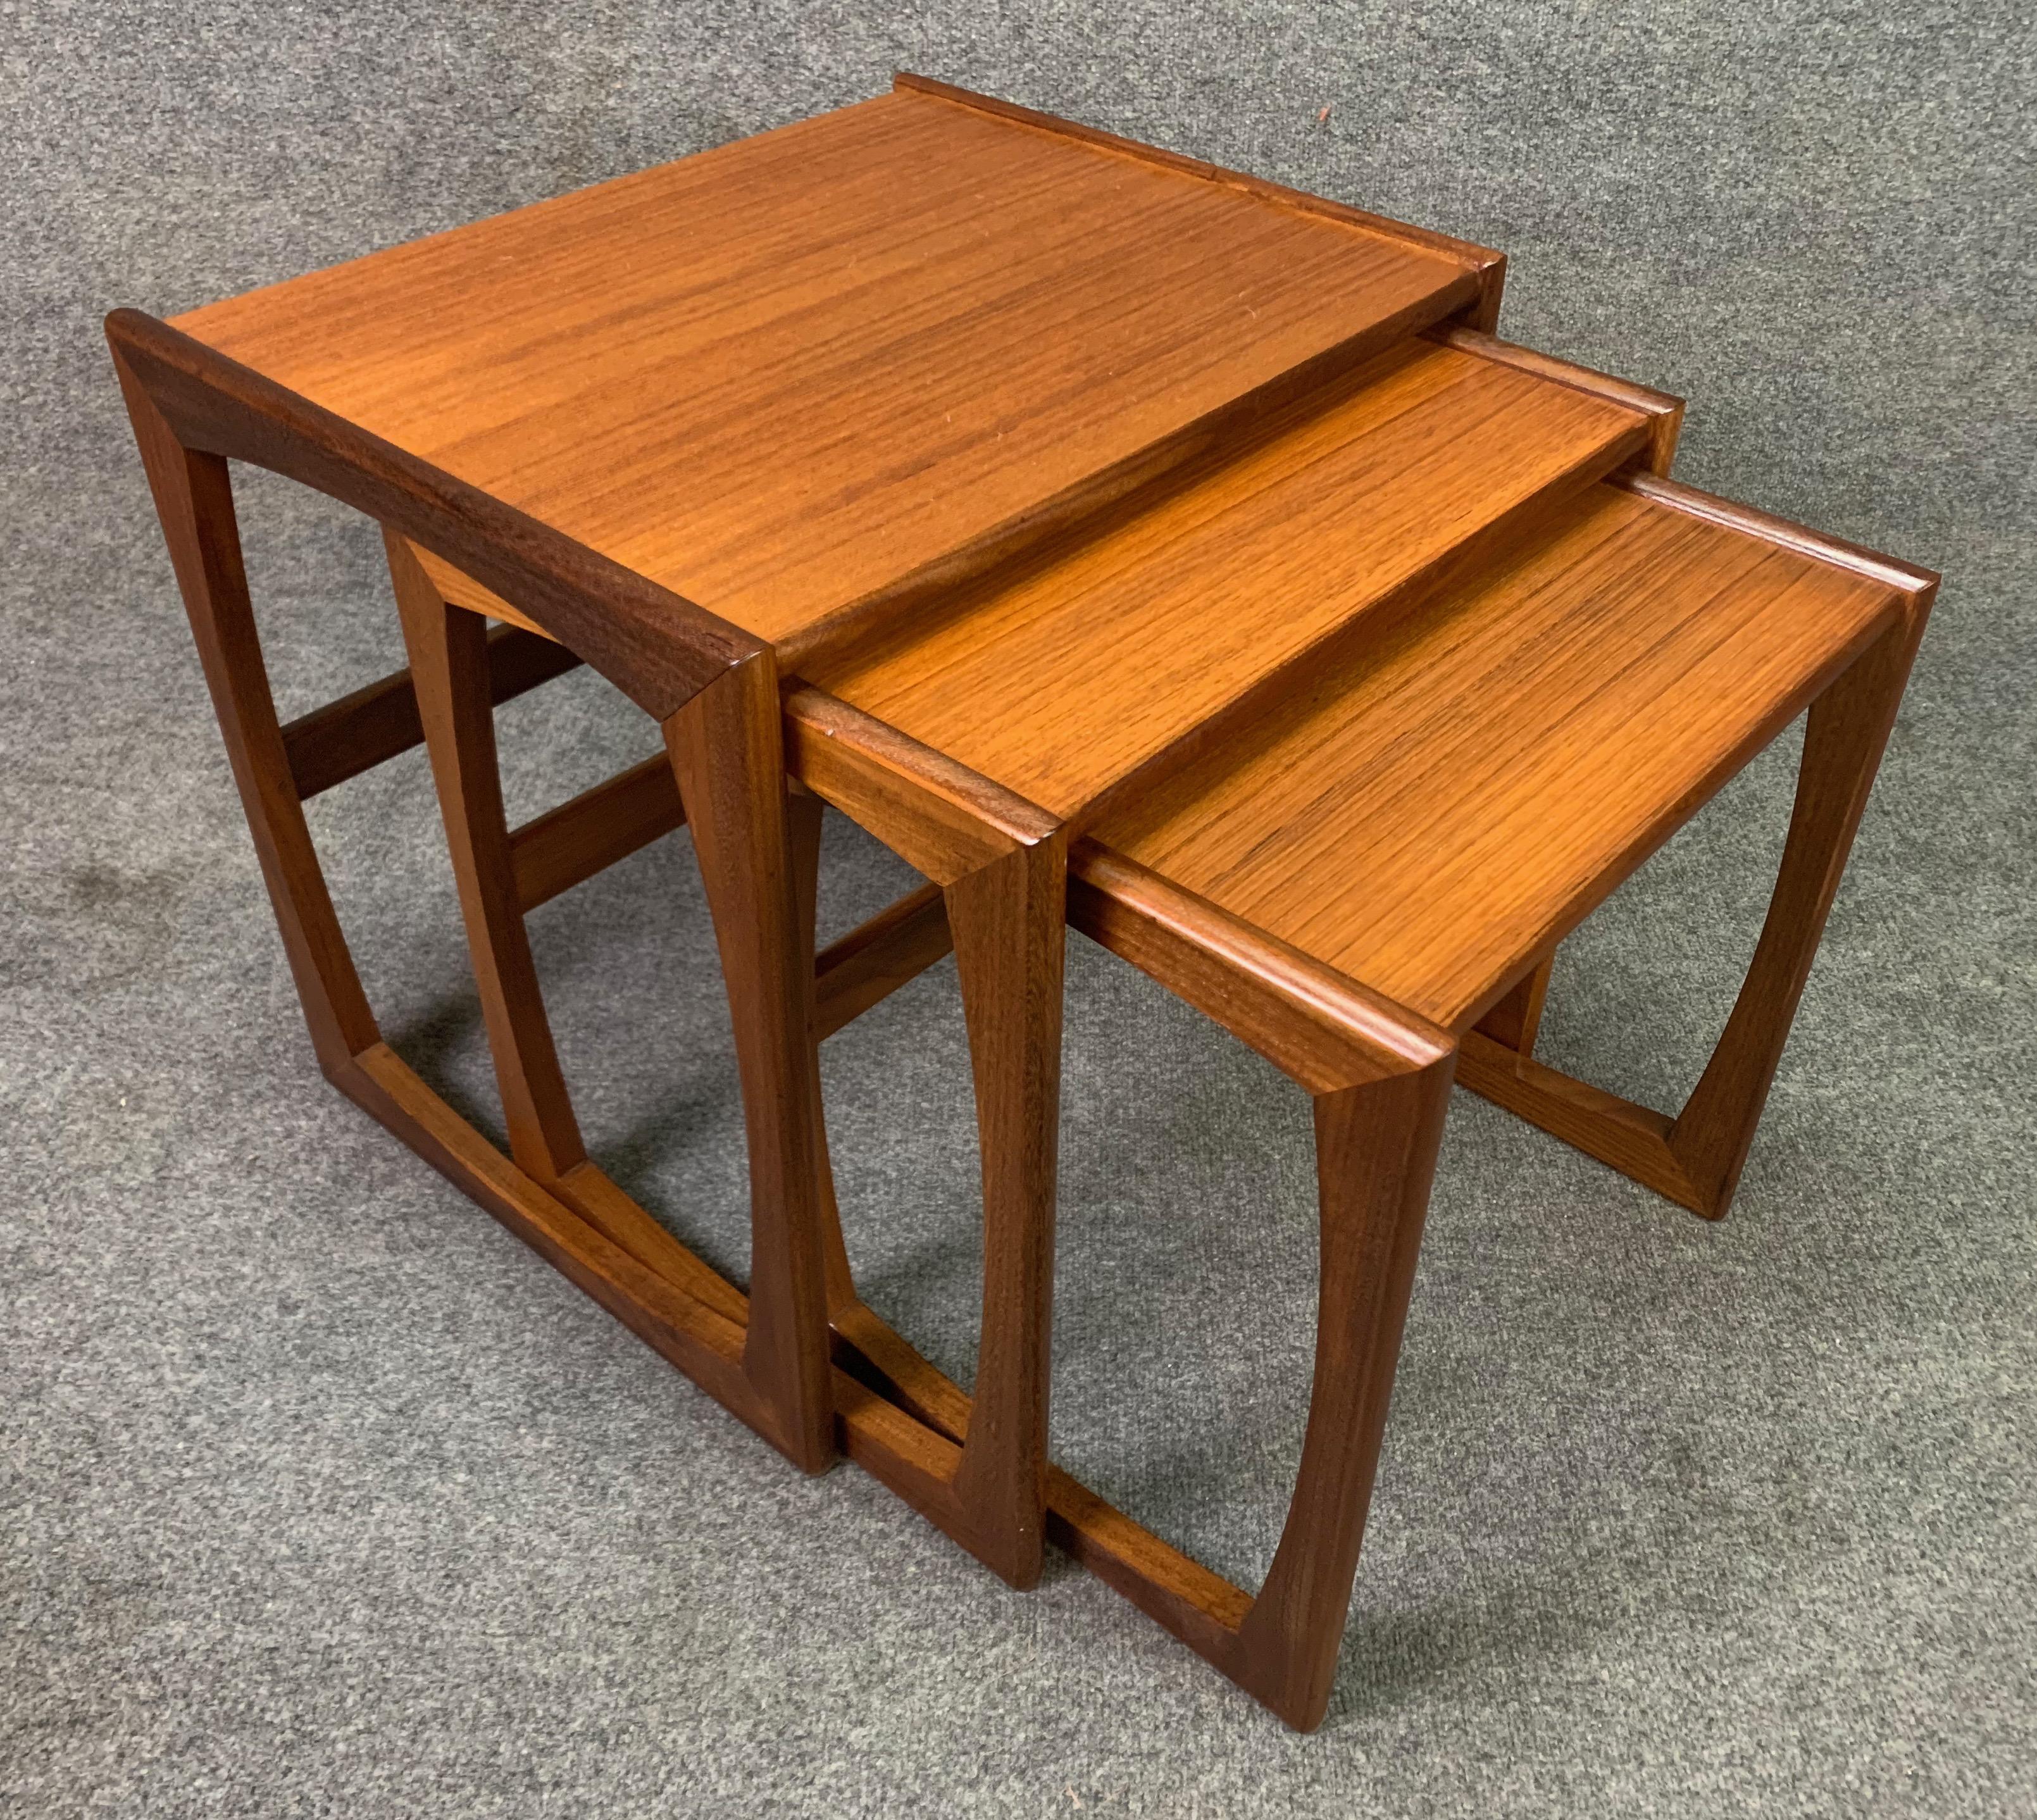 Here is a beautiful set of three nesting tables in teak designed by R. Bennett for the 